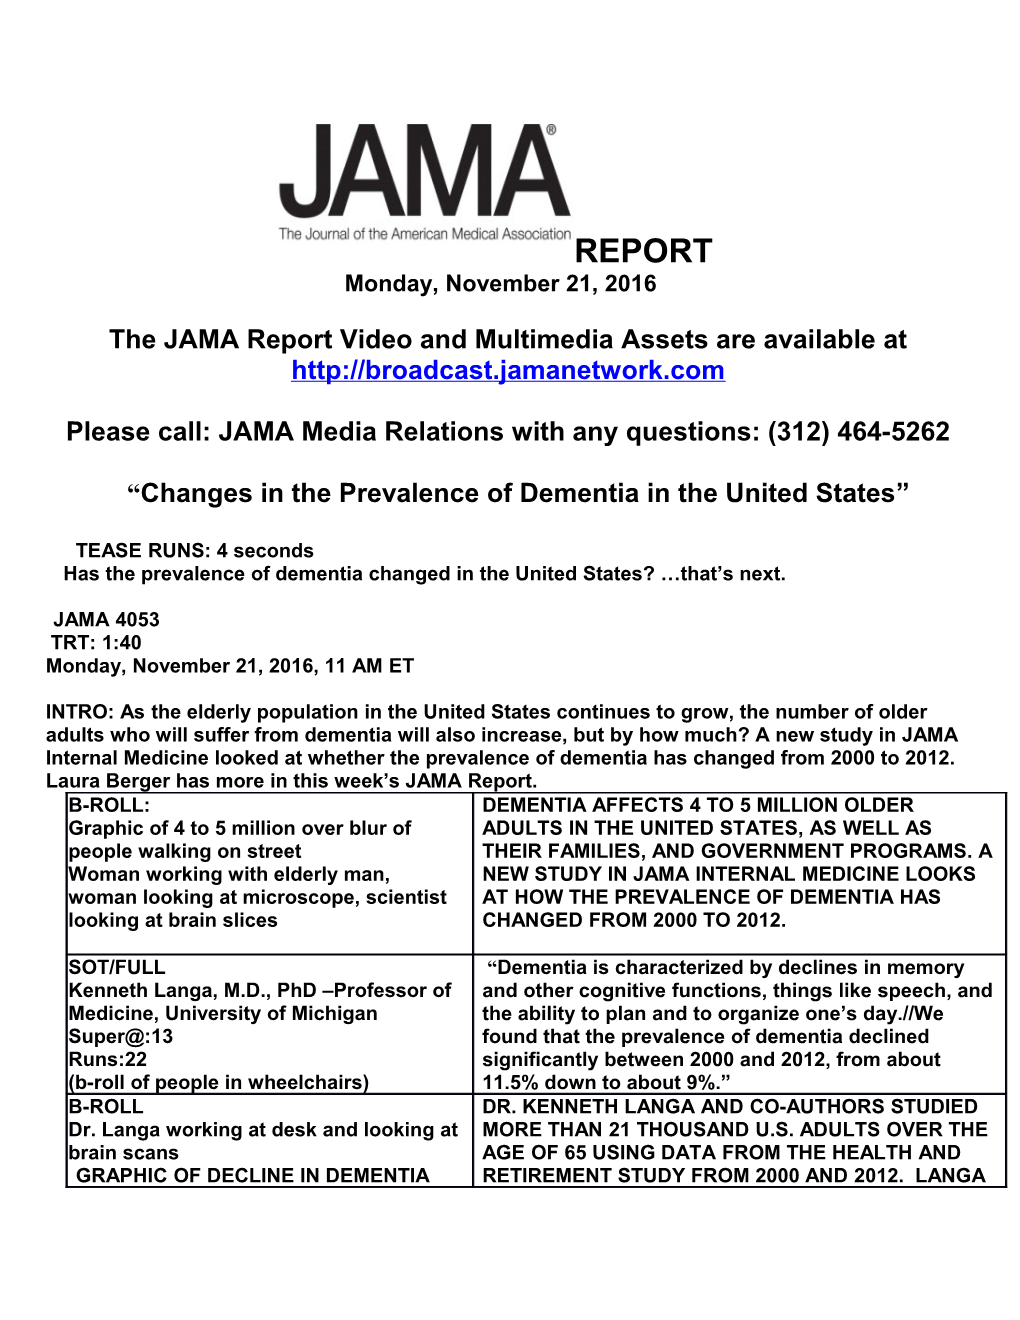 The JAMA Report Video and Multimedia Assets Are Available At